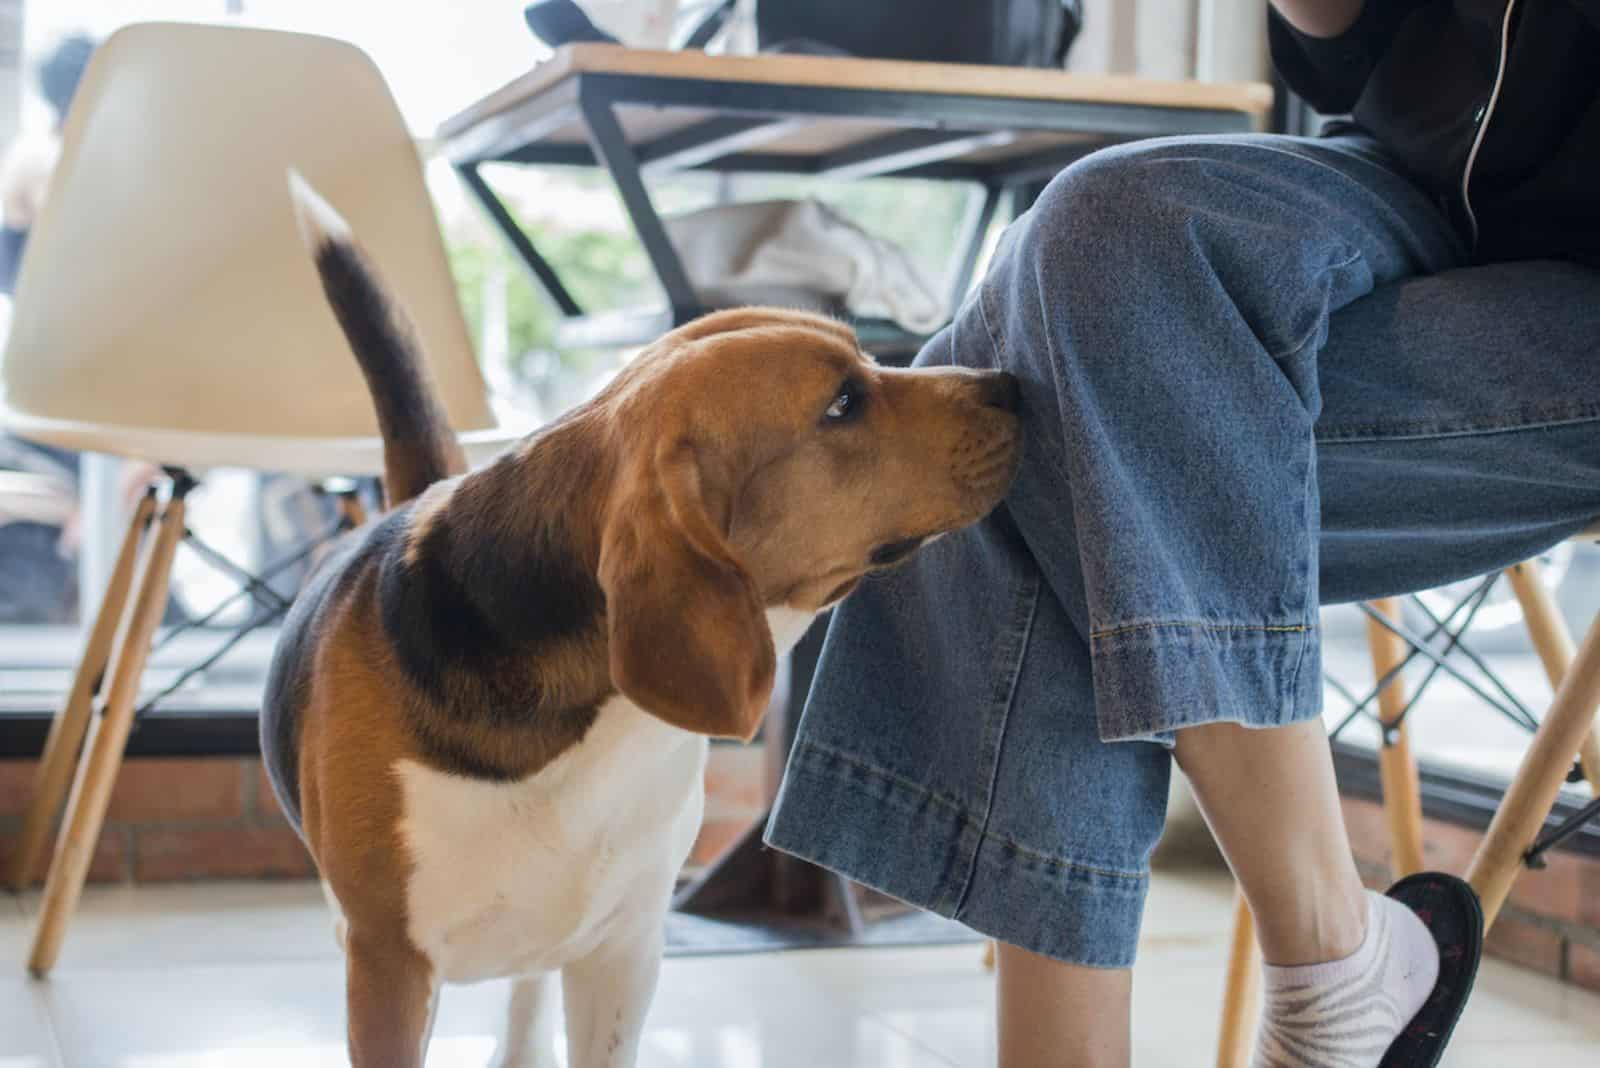 a woman is sitting on a chair, a dog is sniffing her